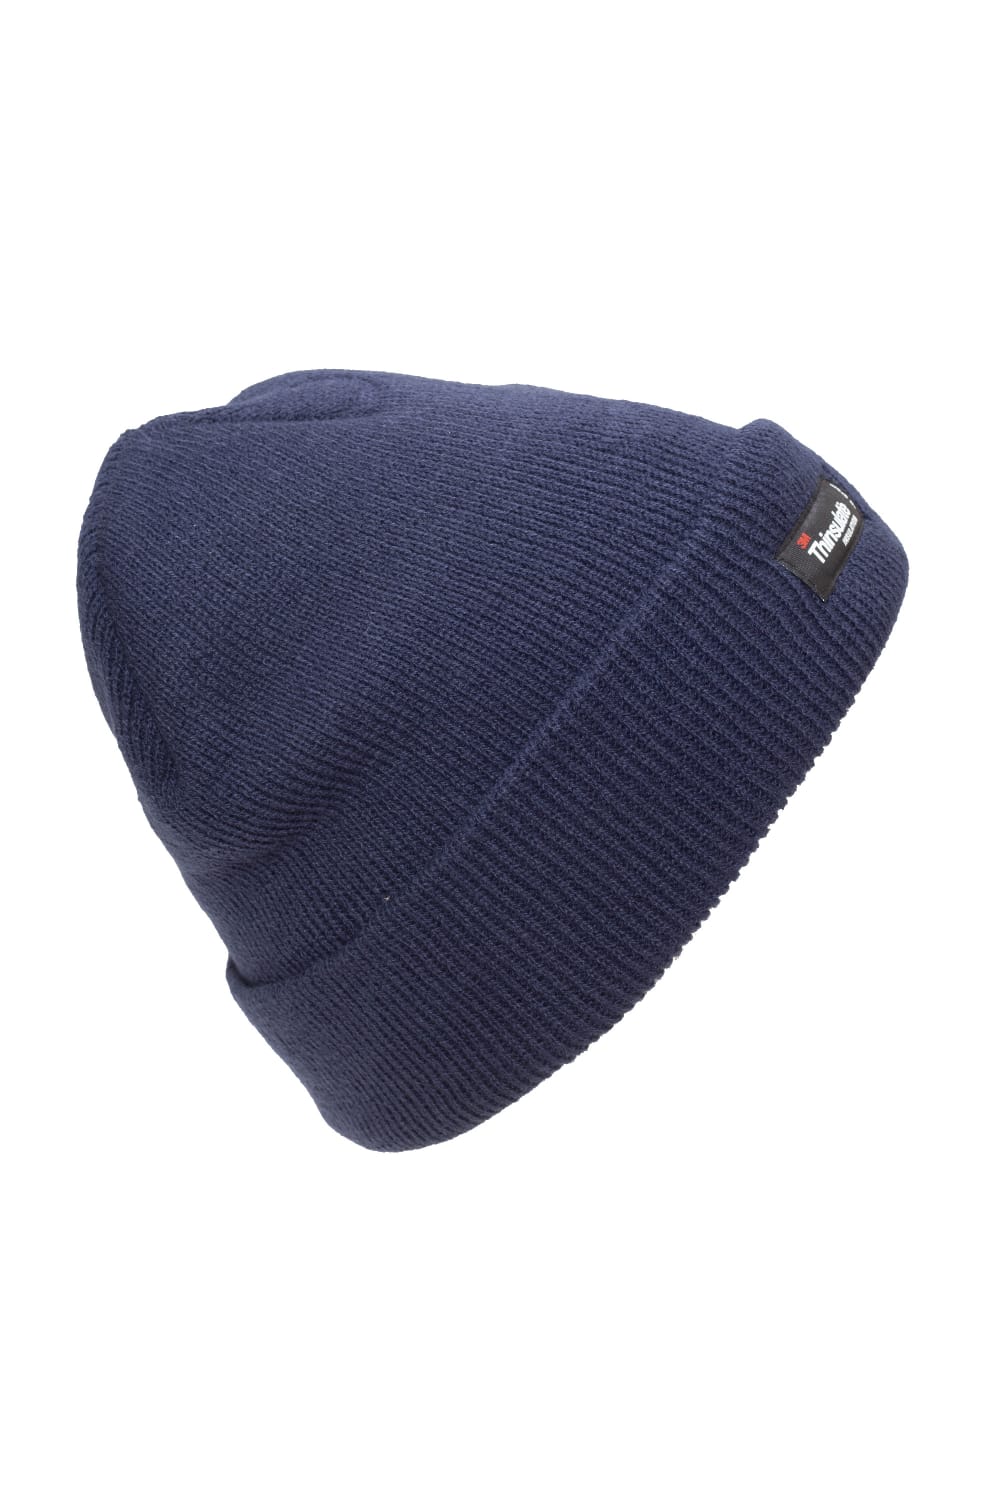 Kids/Childrens Knitted Winter/Ski Hat With Lining (3M 40g) - Navy